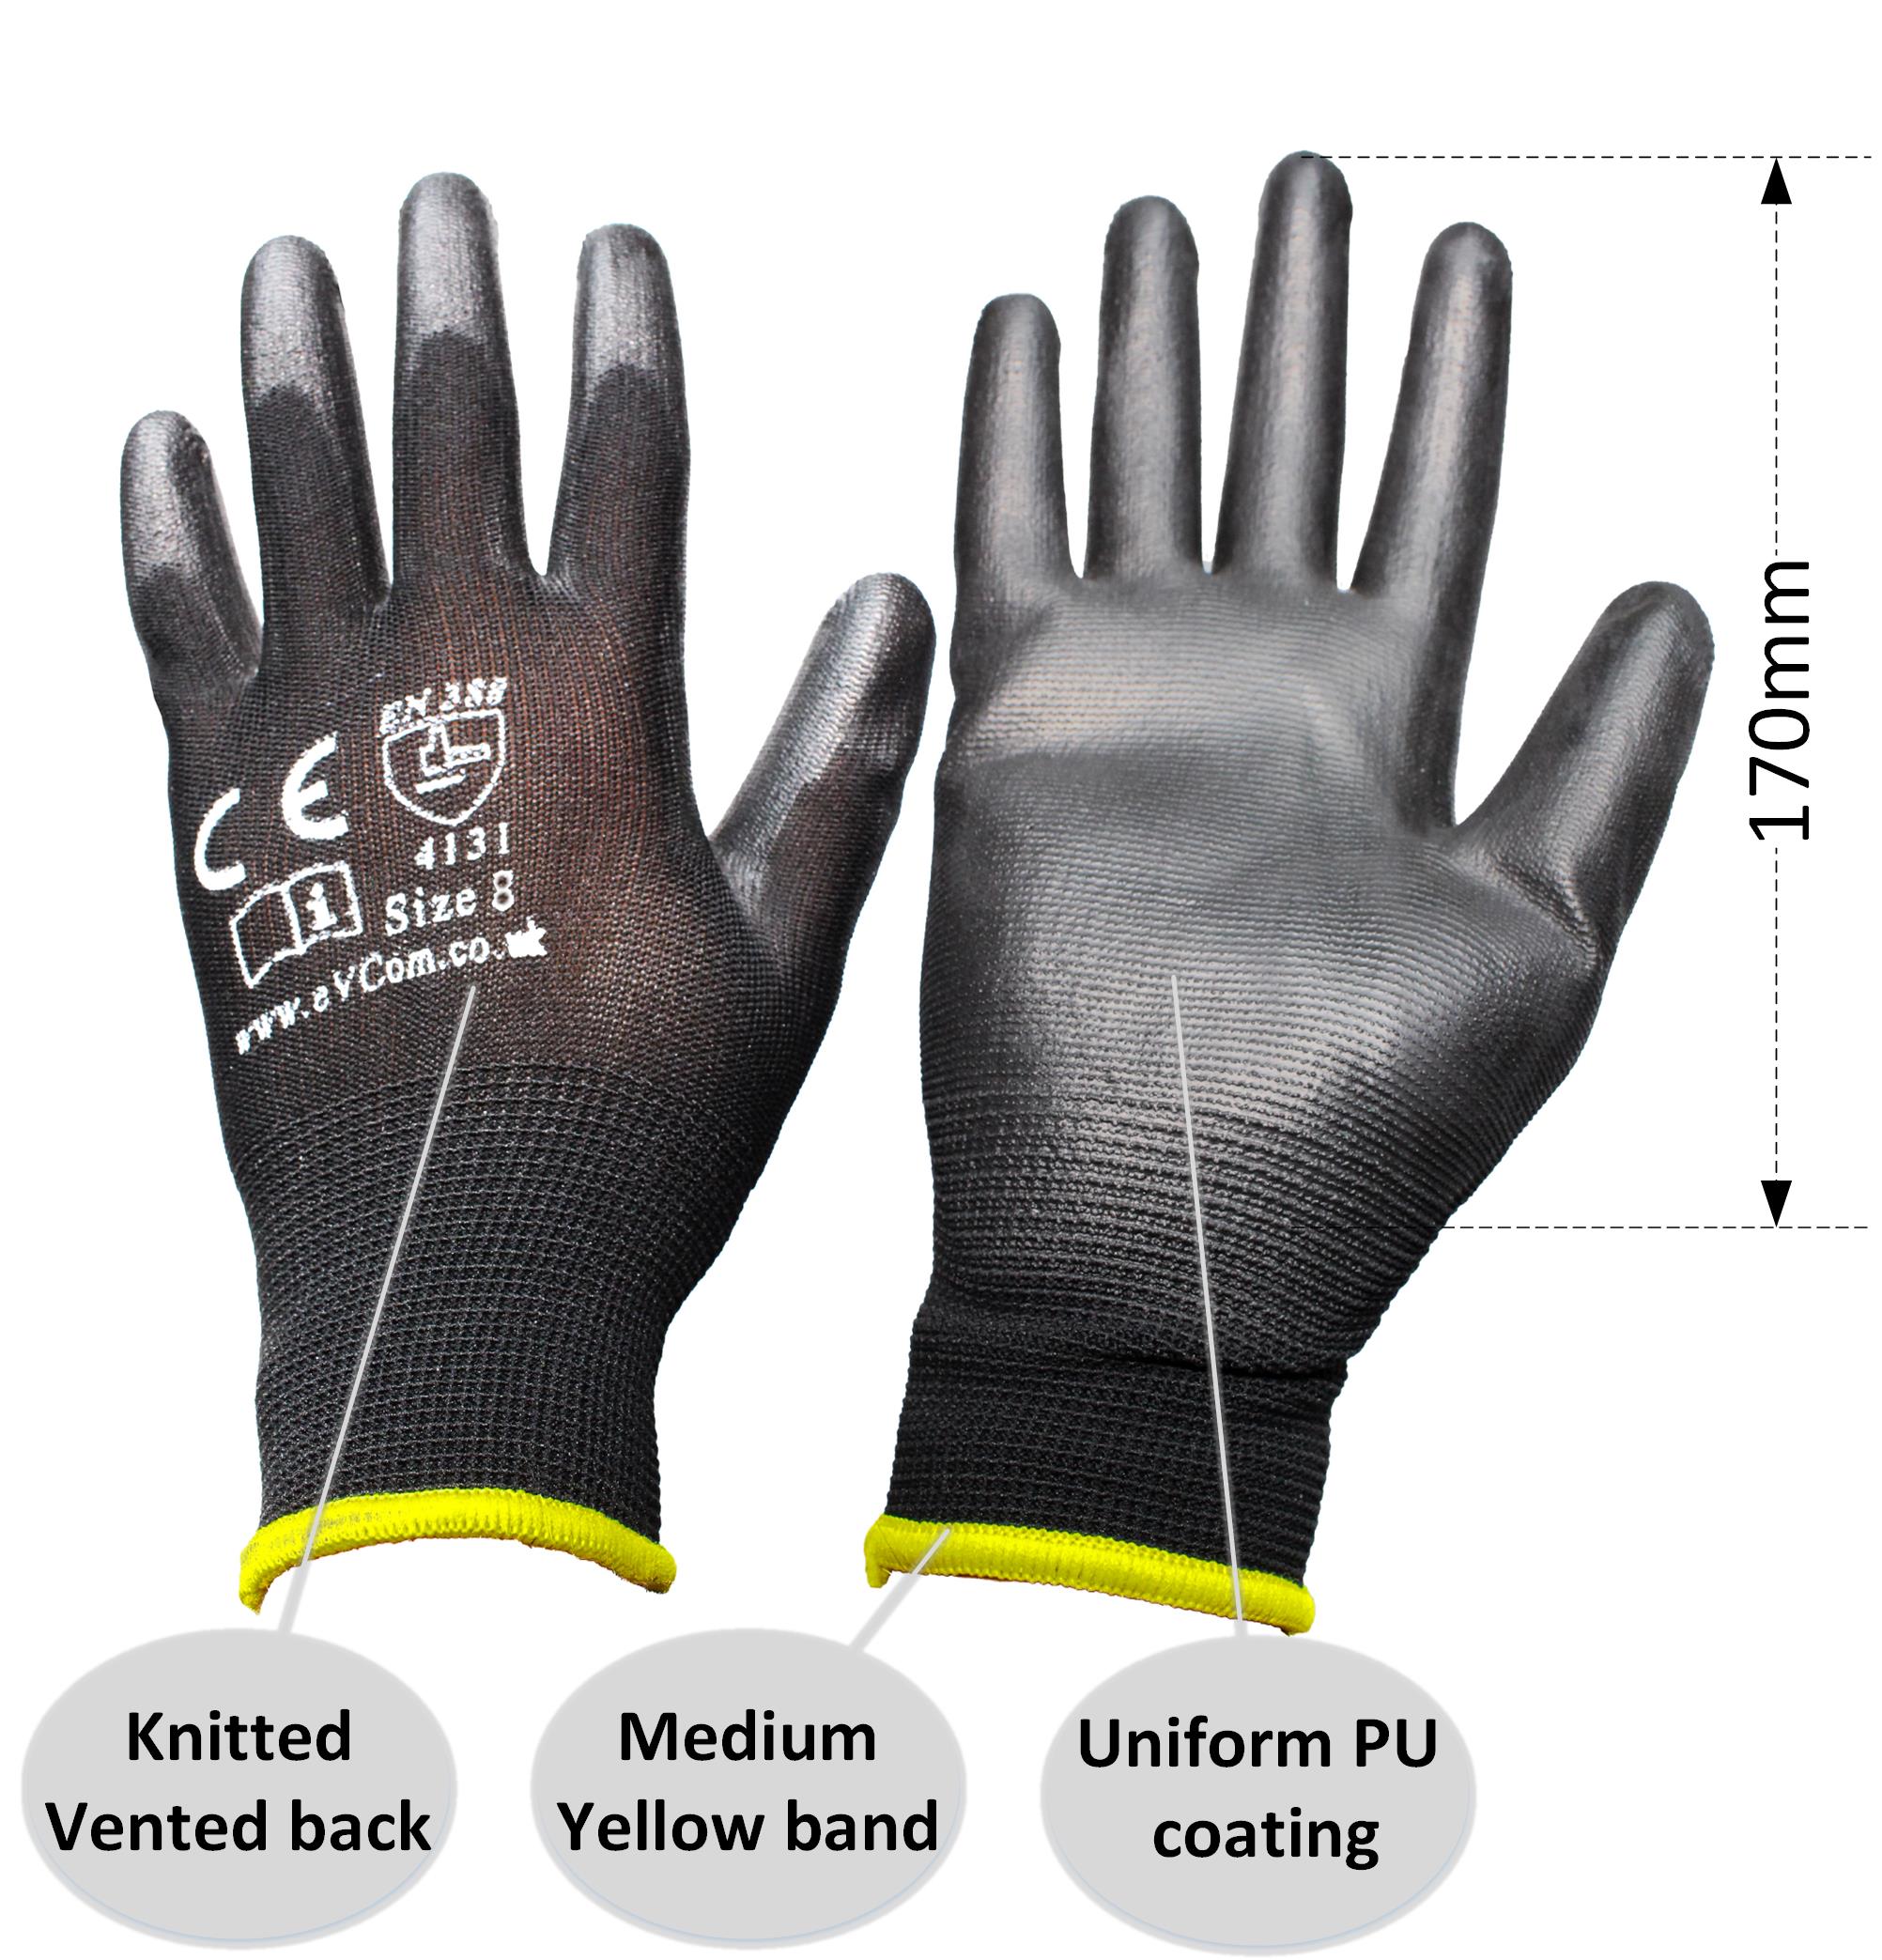 24pairs PU Work Gloves - New & improved quality by eVCom®